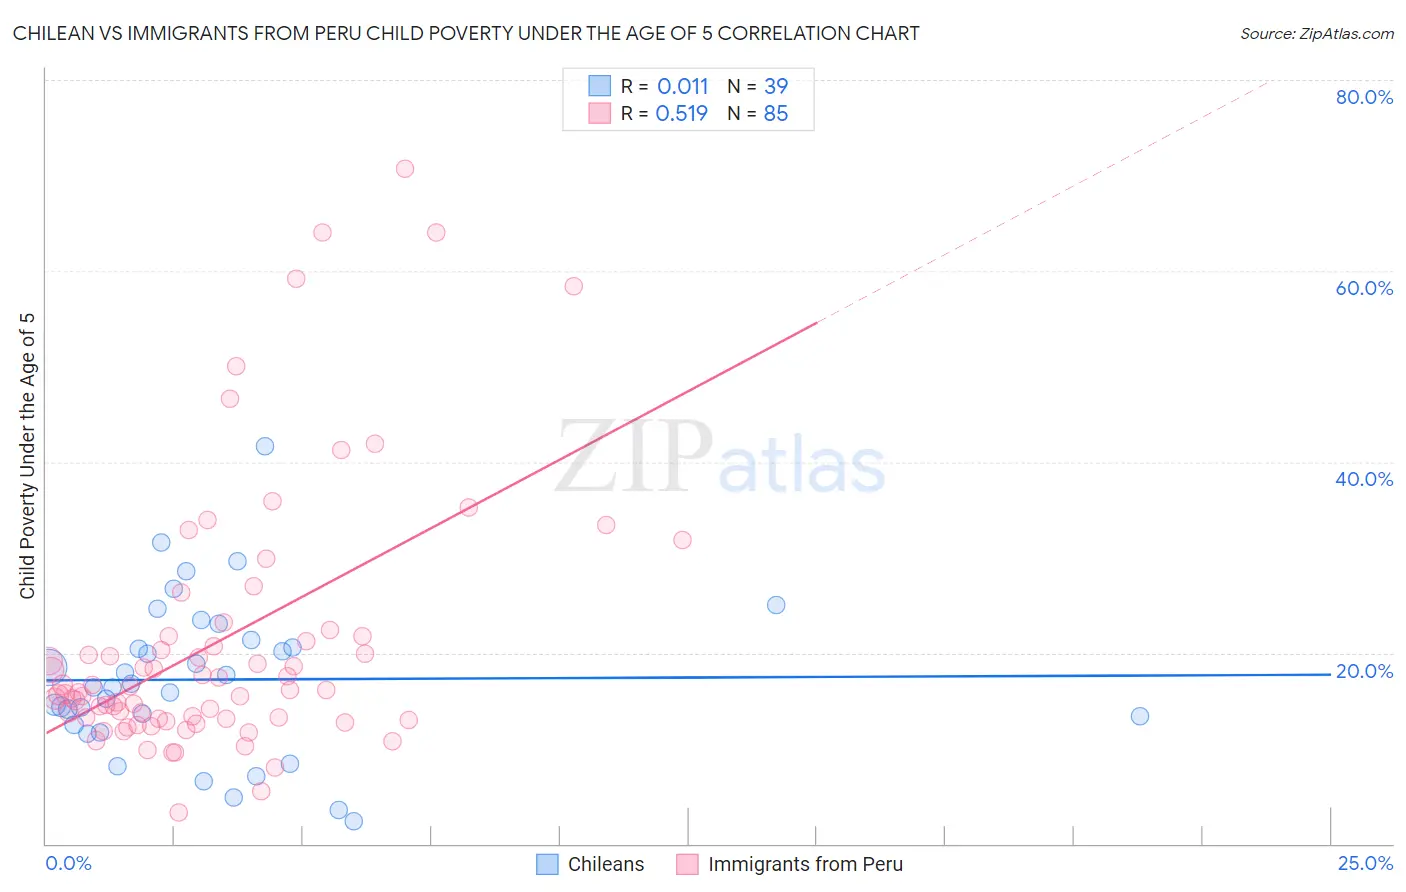 Chilean vs Immigrants from Peru Child Poverty Under the Age of 5